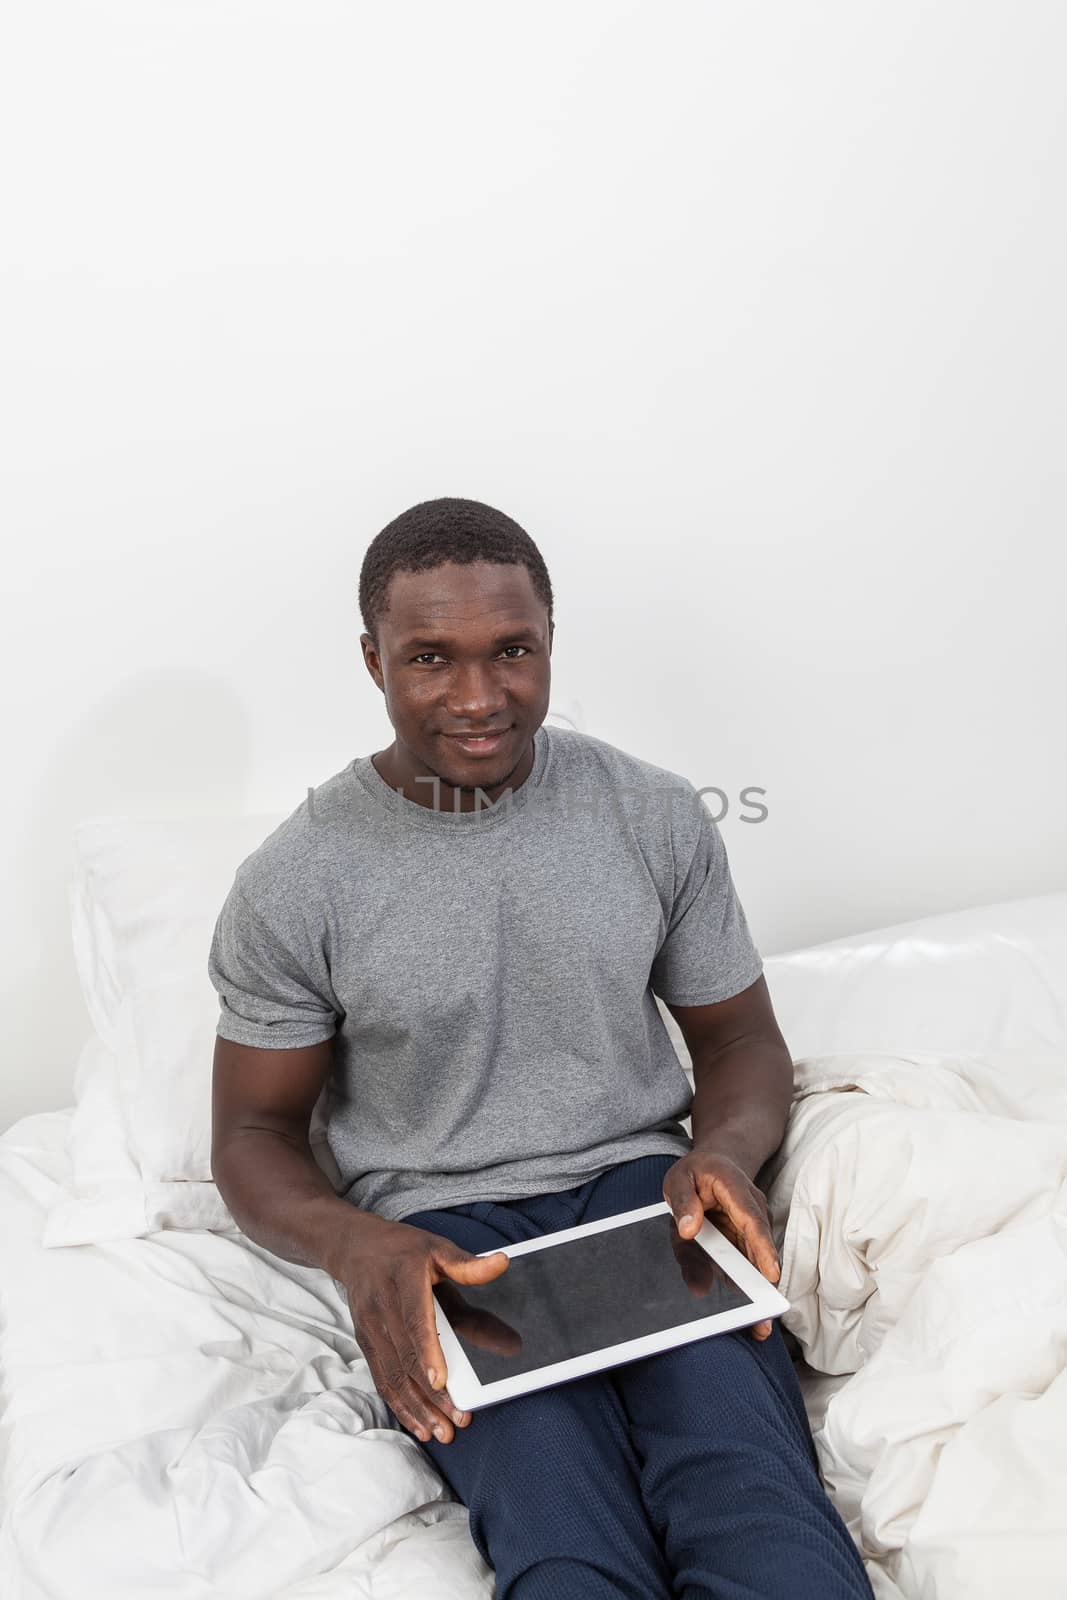 Man looking at camera and touching his tablet